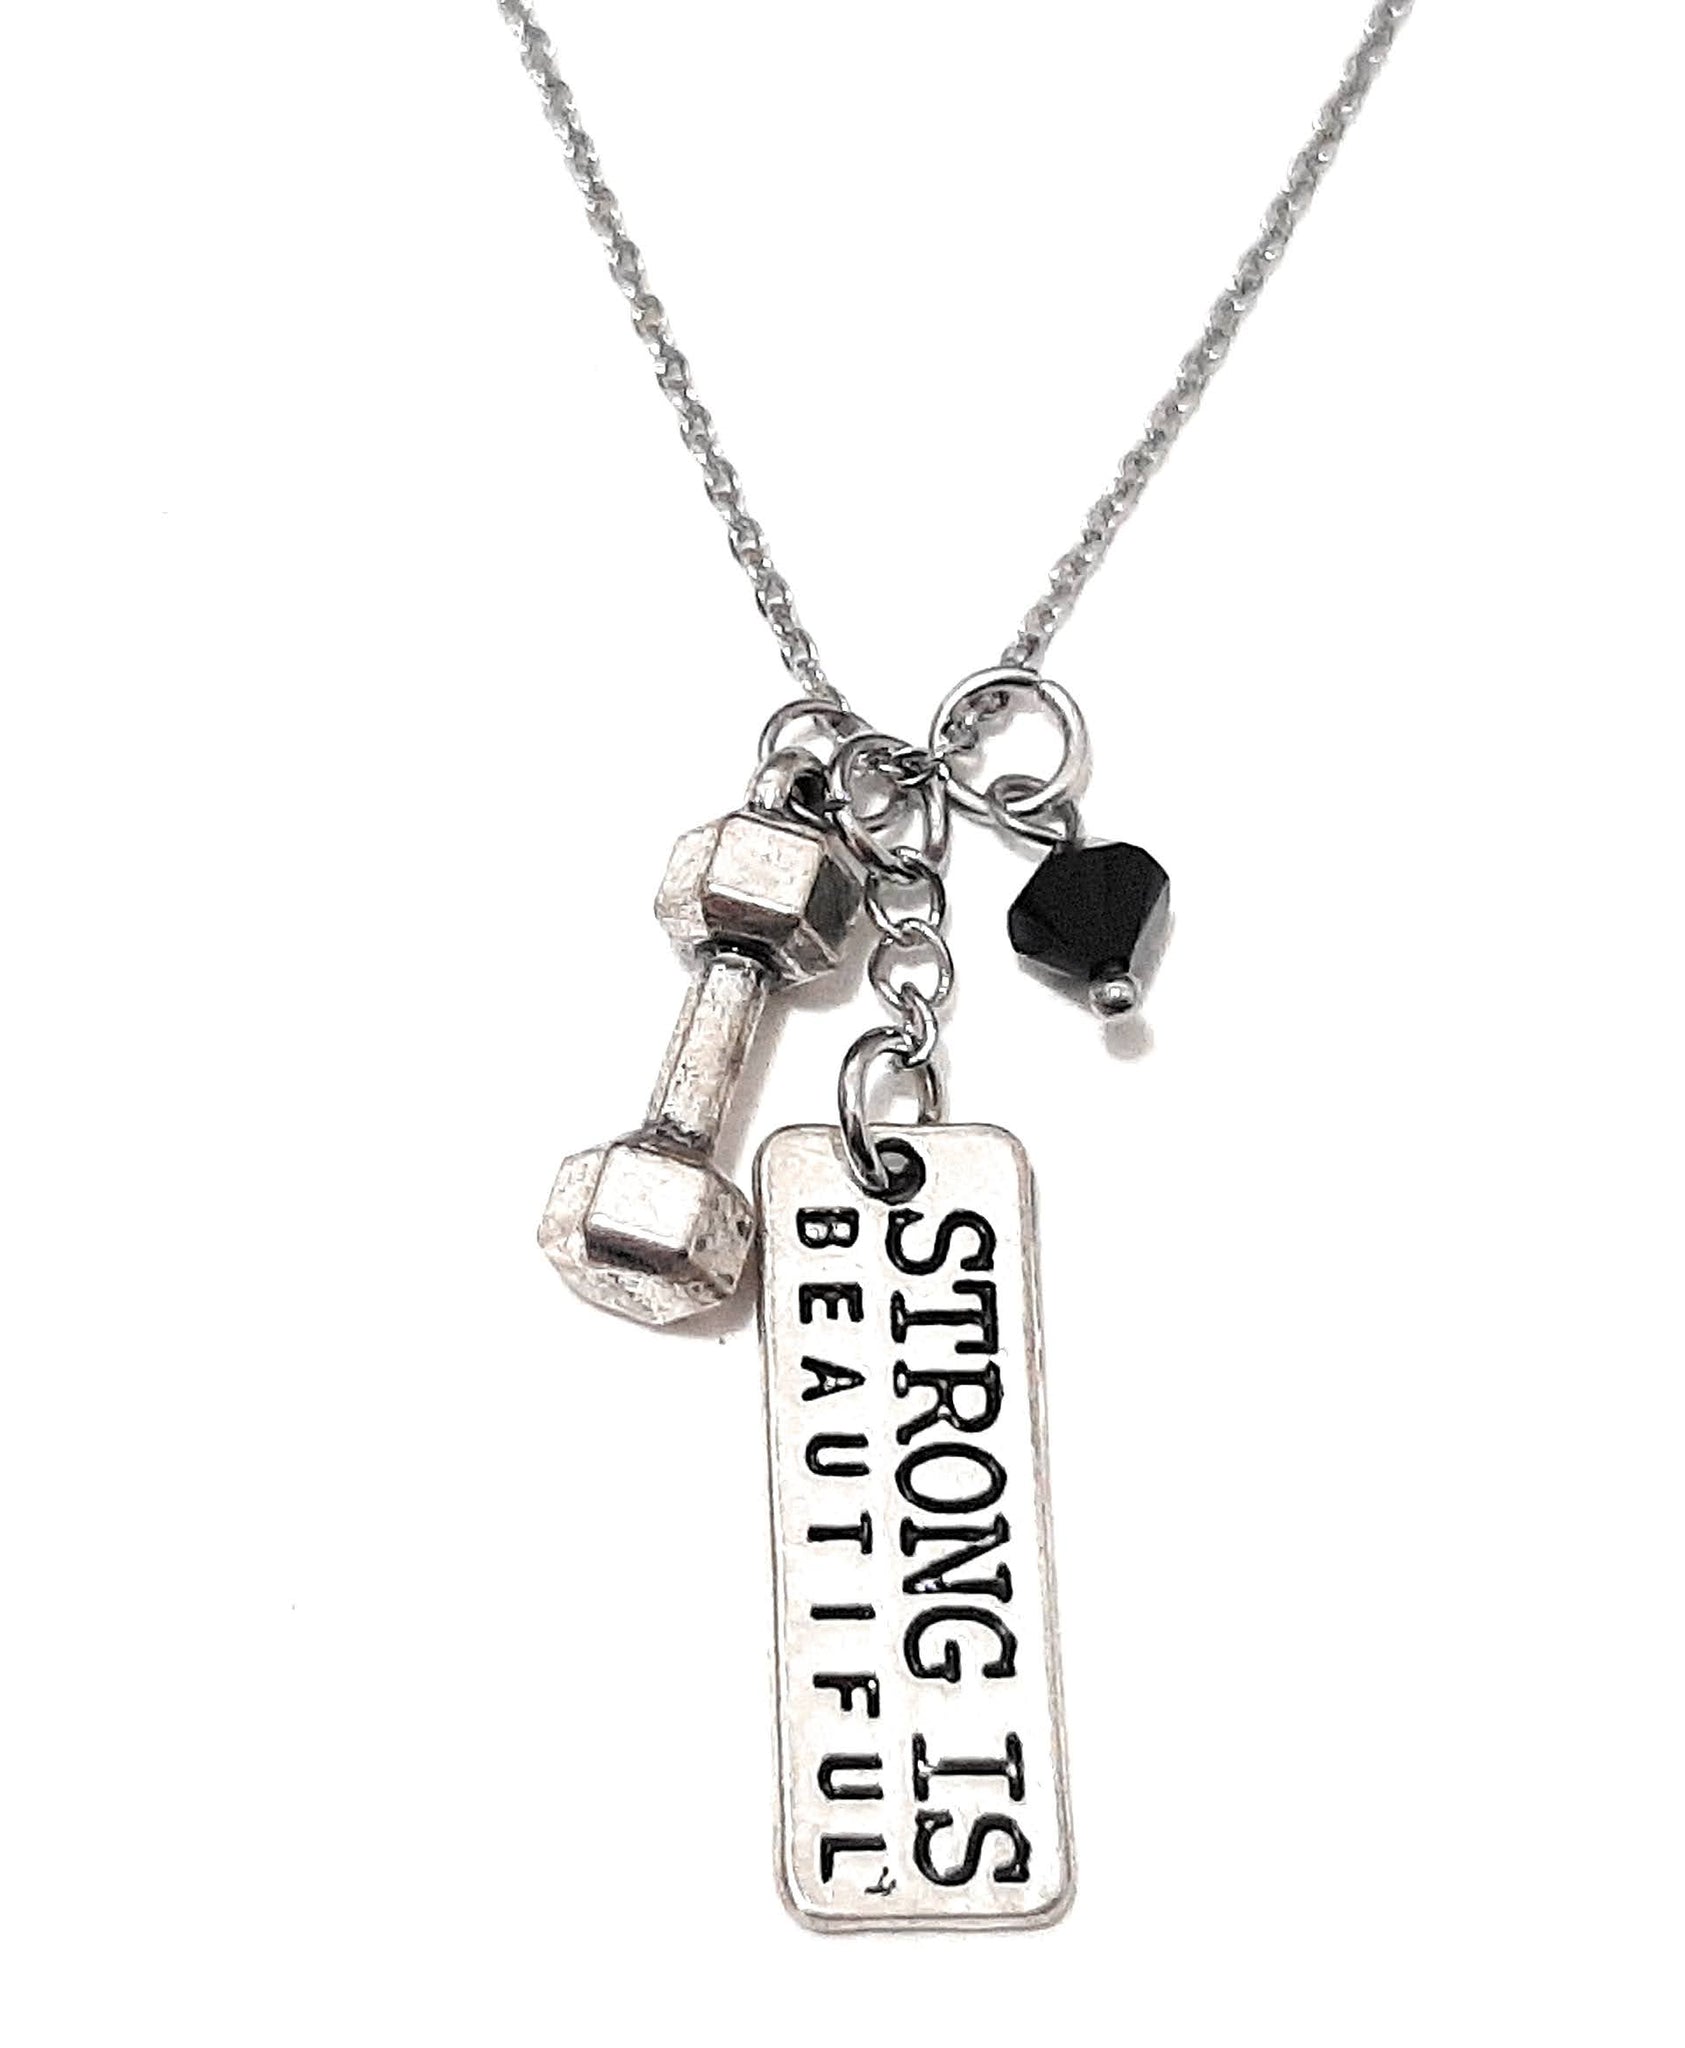 Message Pendant Necklace "Strong is Beautiful" Your Choice of Charm and Birthstone Color